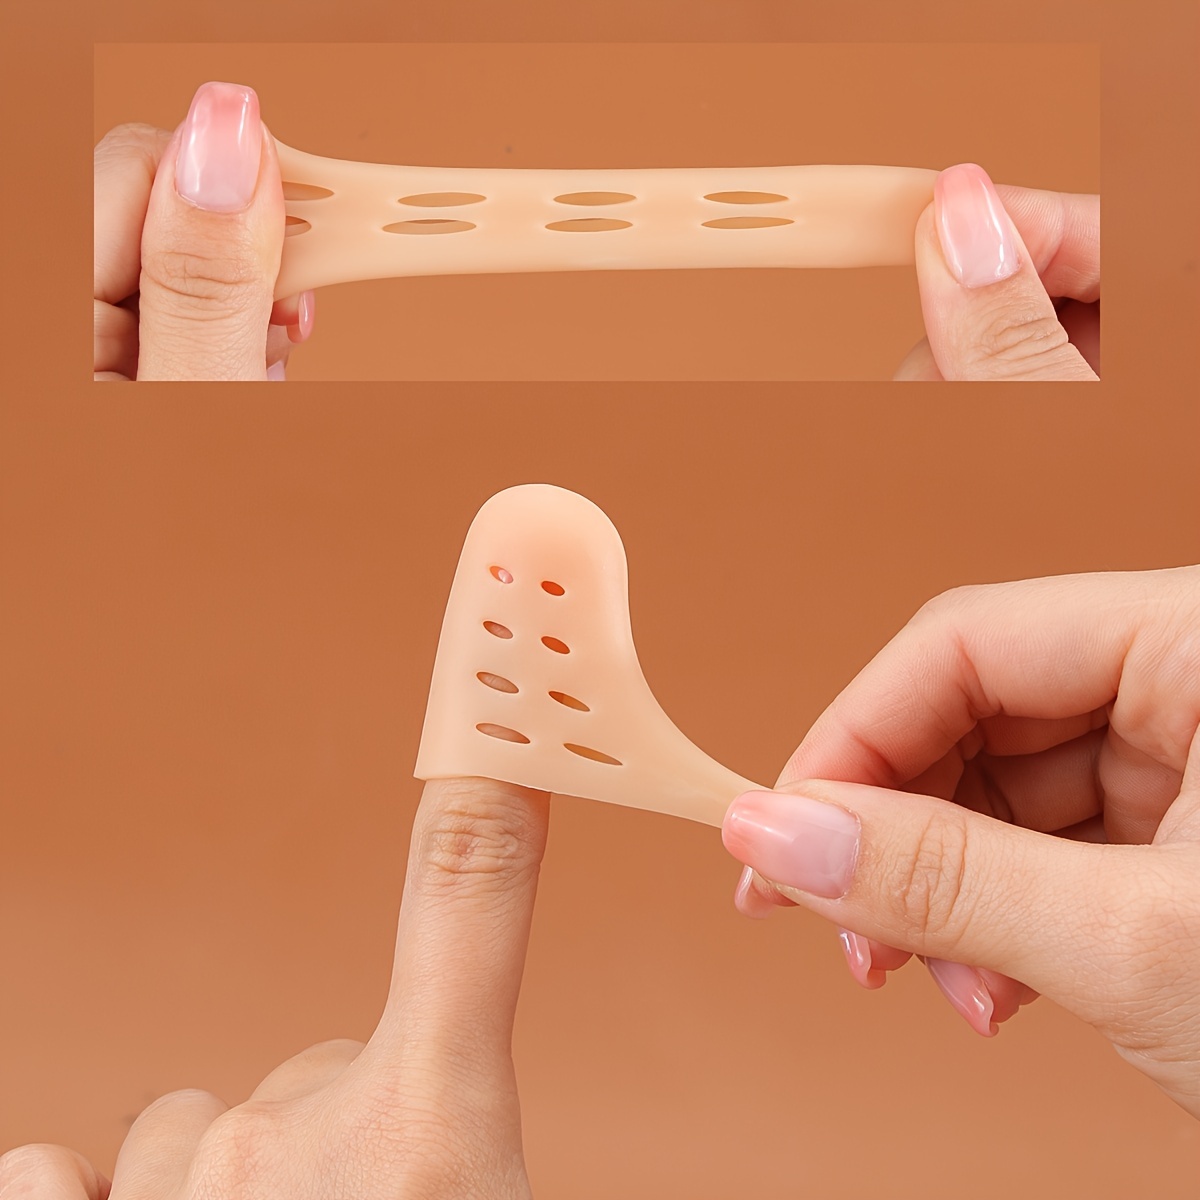 3pcs Silicone Finger Protectors, Finger Protectors, Finger Protectors For  Hot Glue, Silicone Thimble, Hot Glue Finger Protectors, Fingers Tip Pads  Grips For Money Counting Collating Writing Sorting Task Hot Glue And Sport